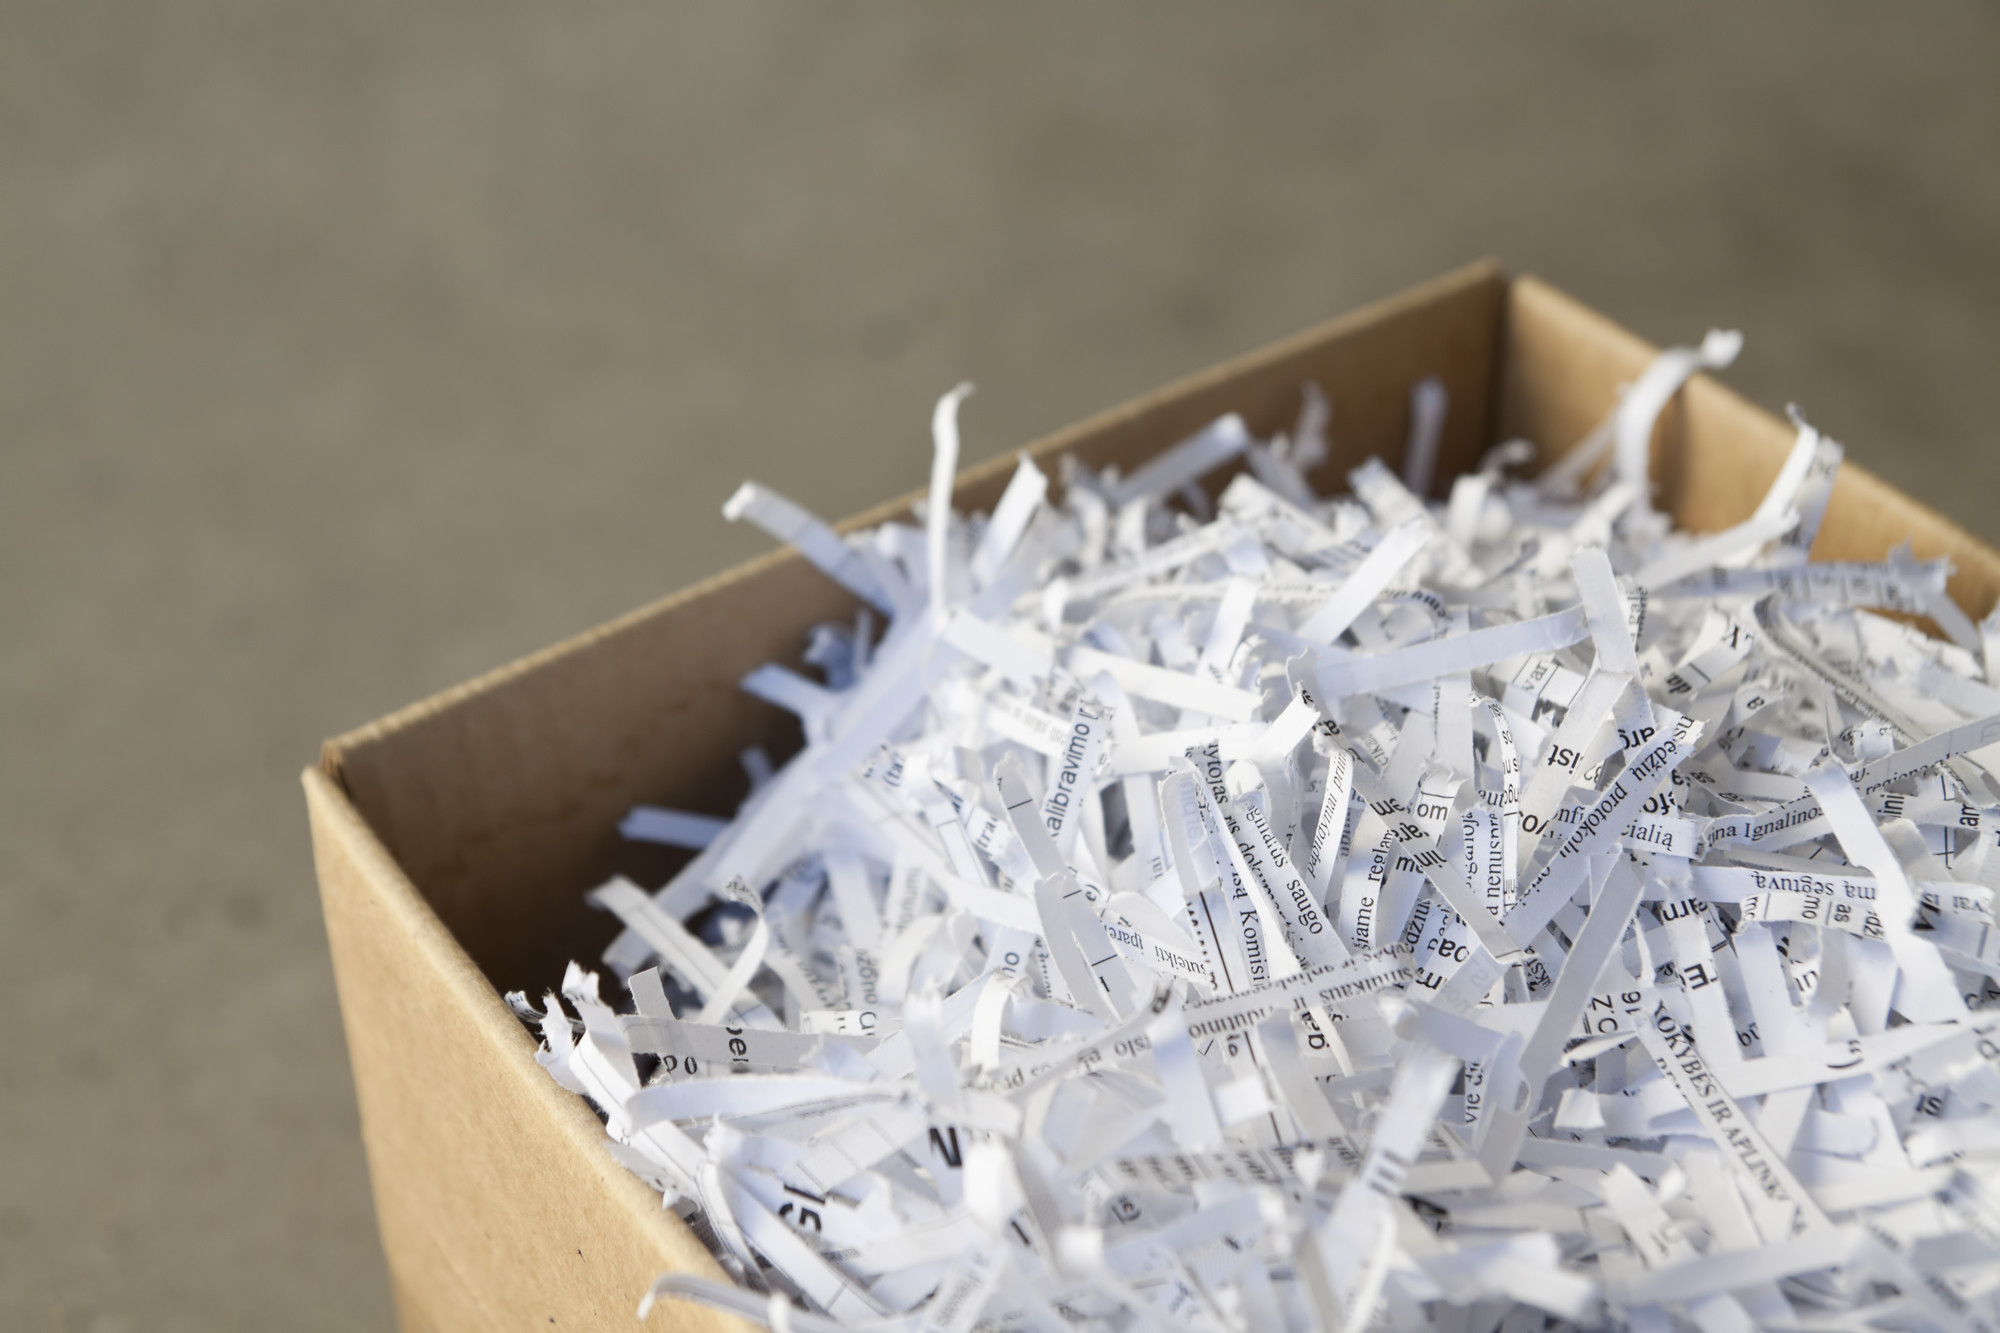 Shredded paper in box - International Shipping, Moving Service in ...